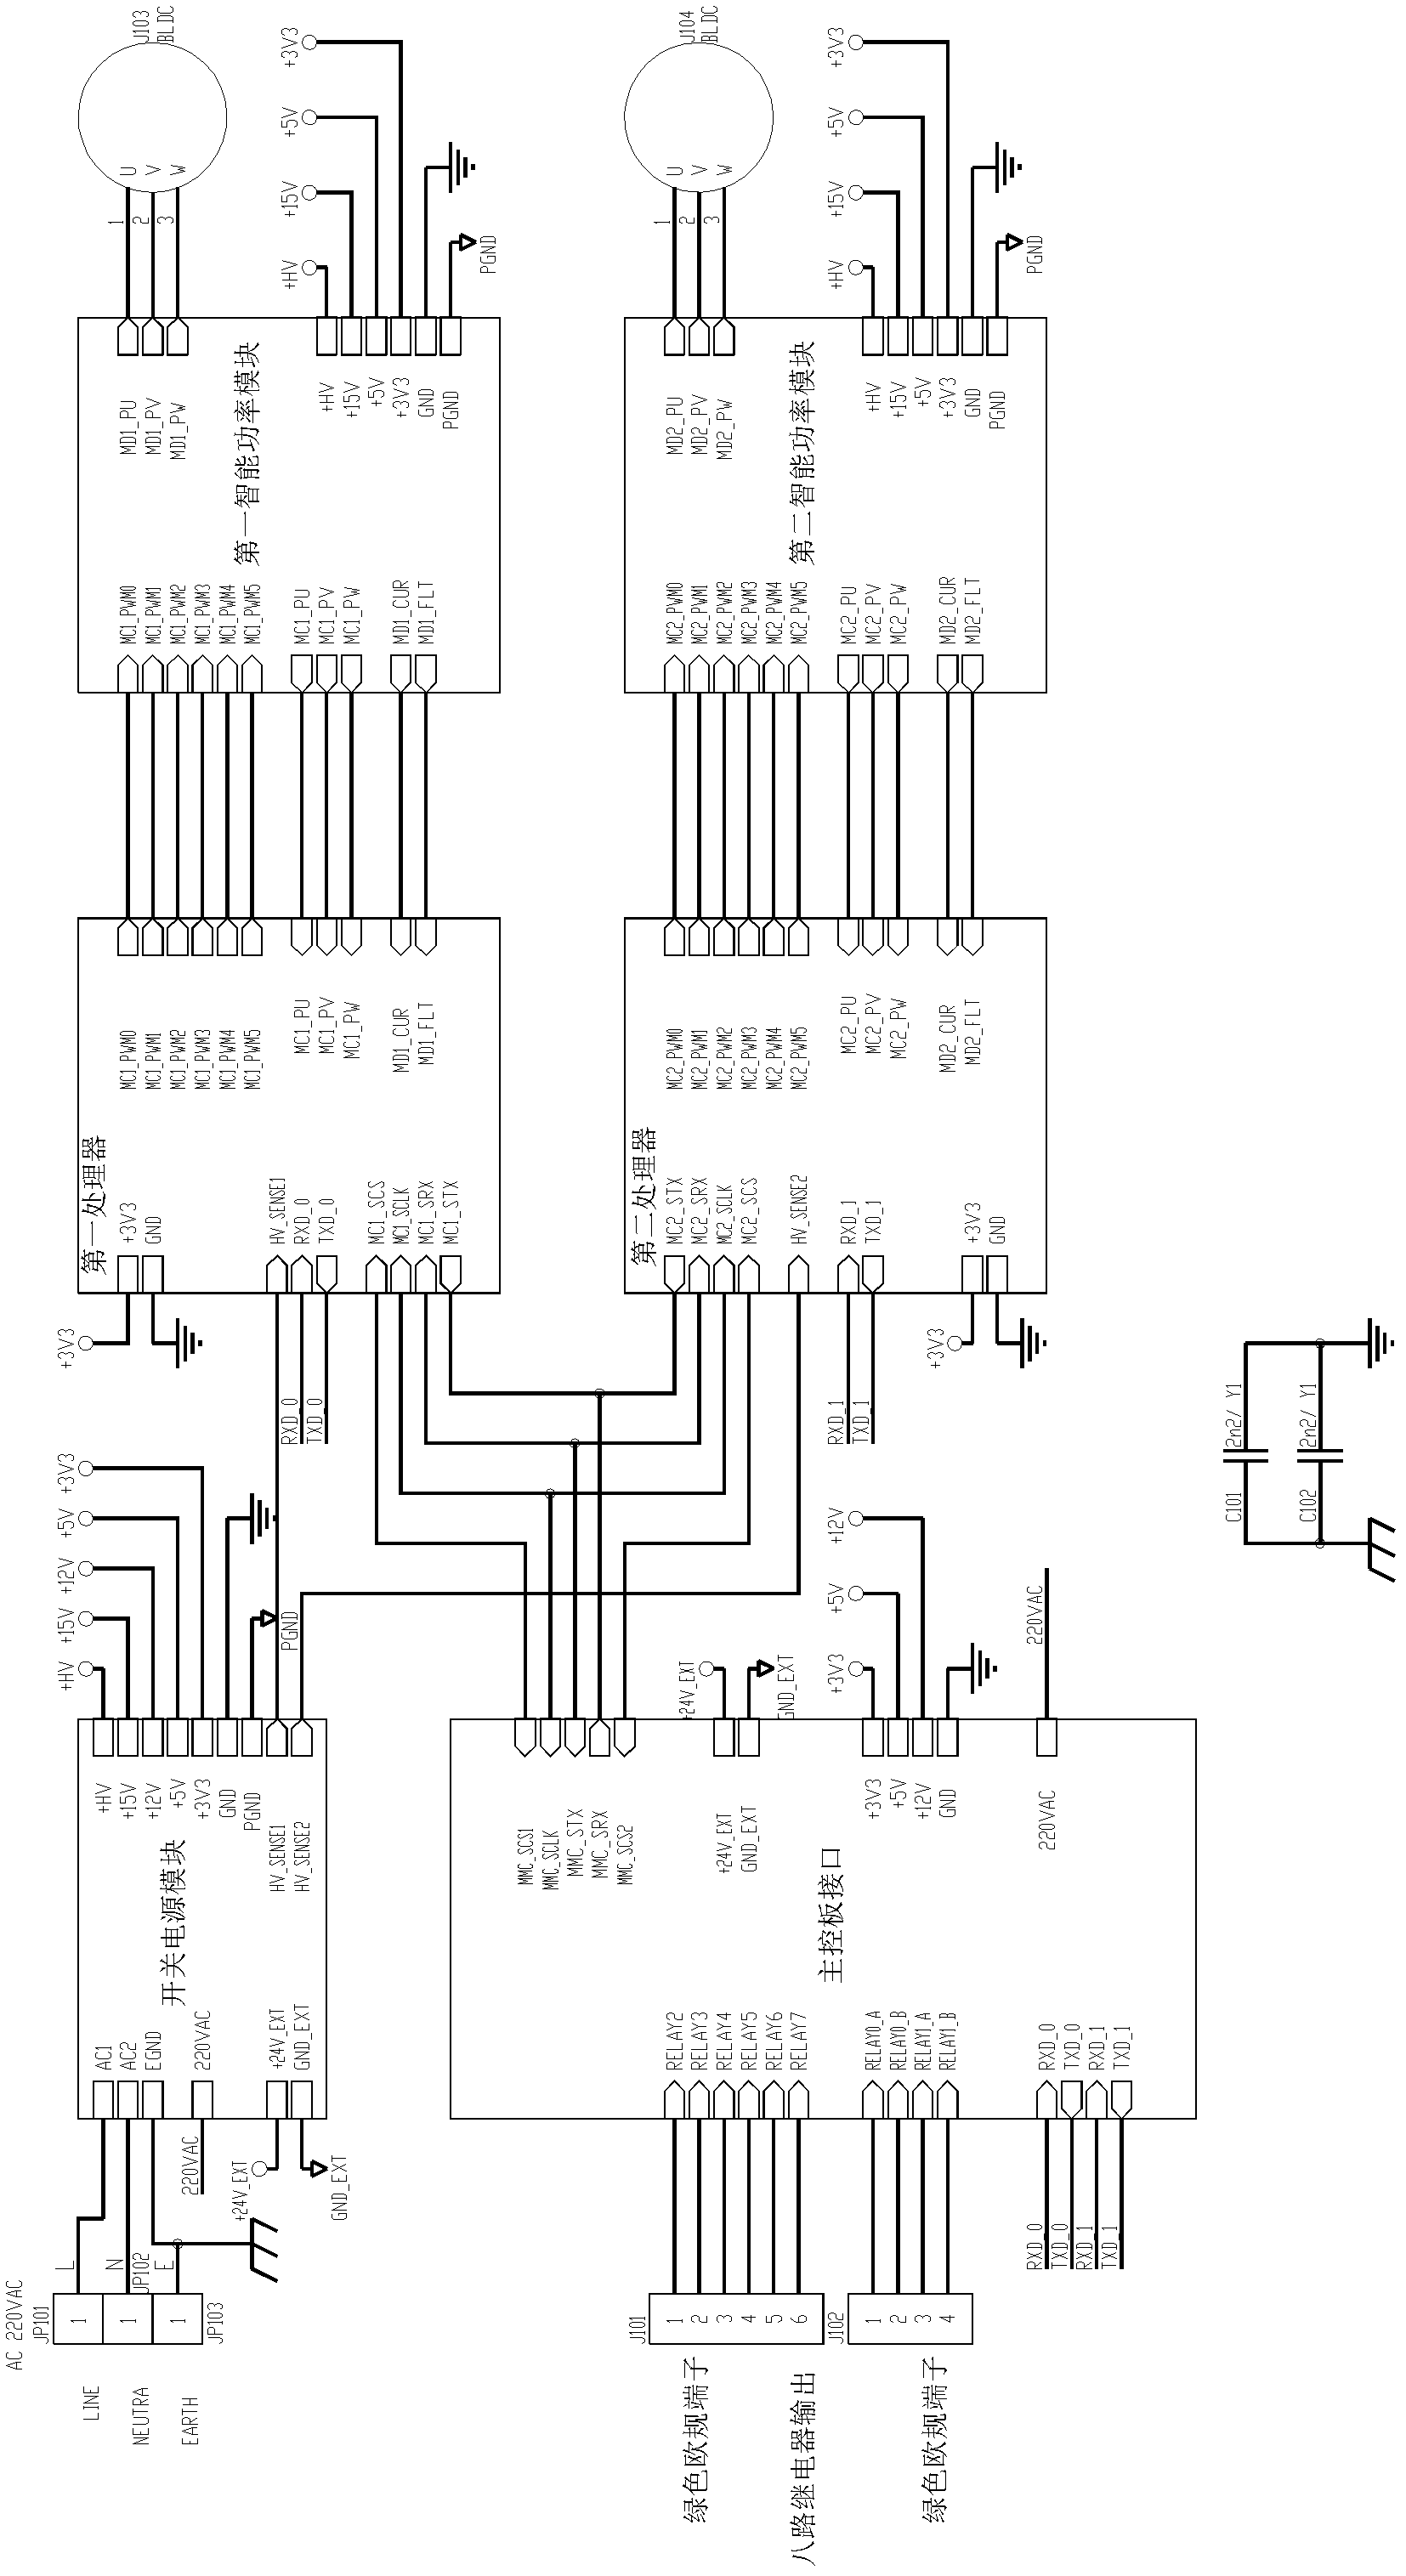 Direct-current brushless variable frequency air conditioner control circuit